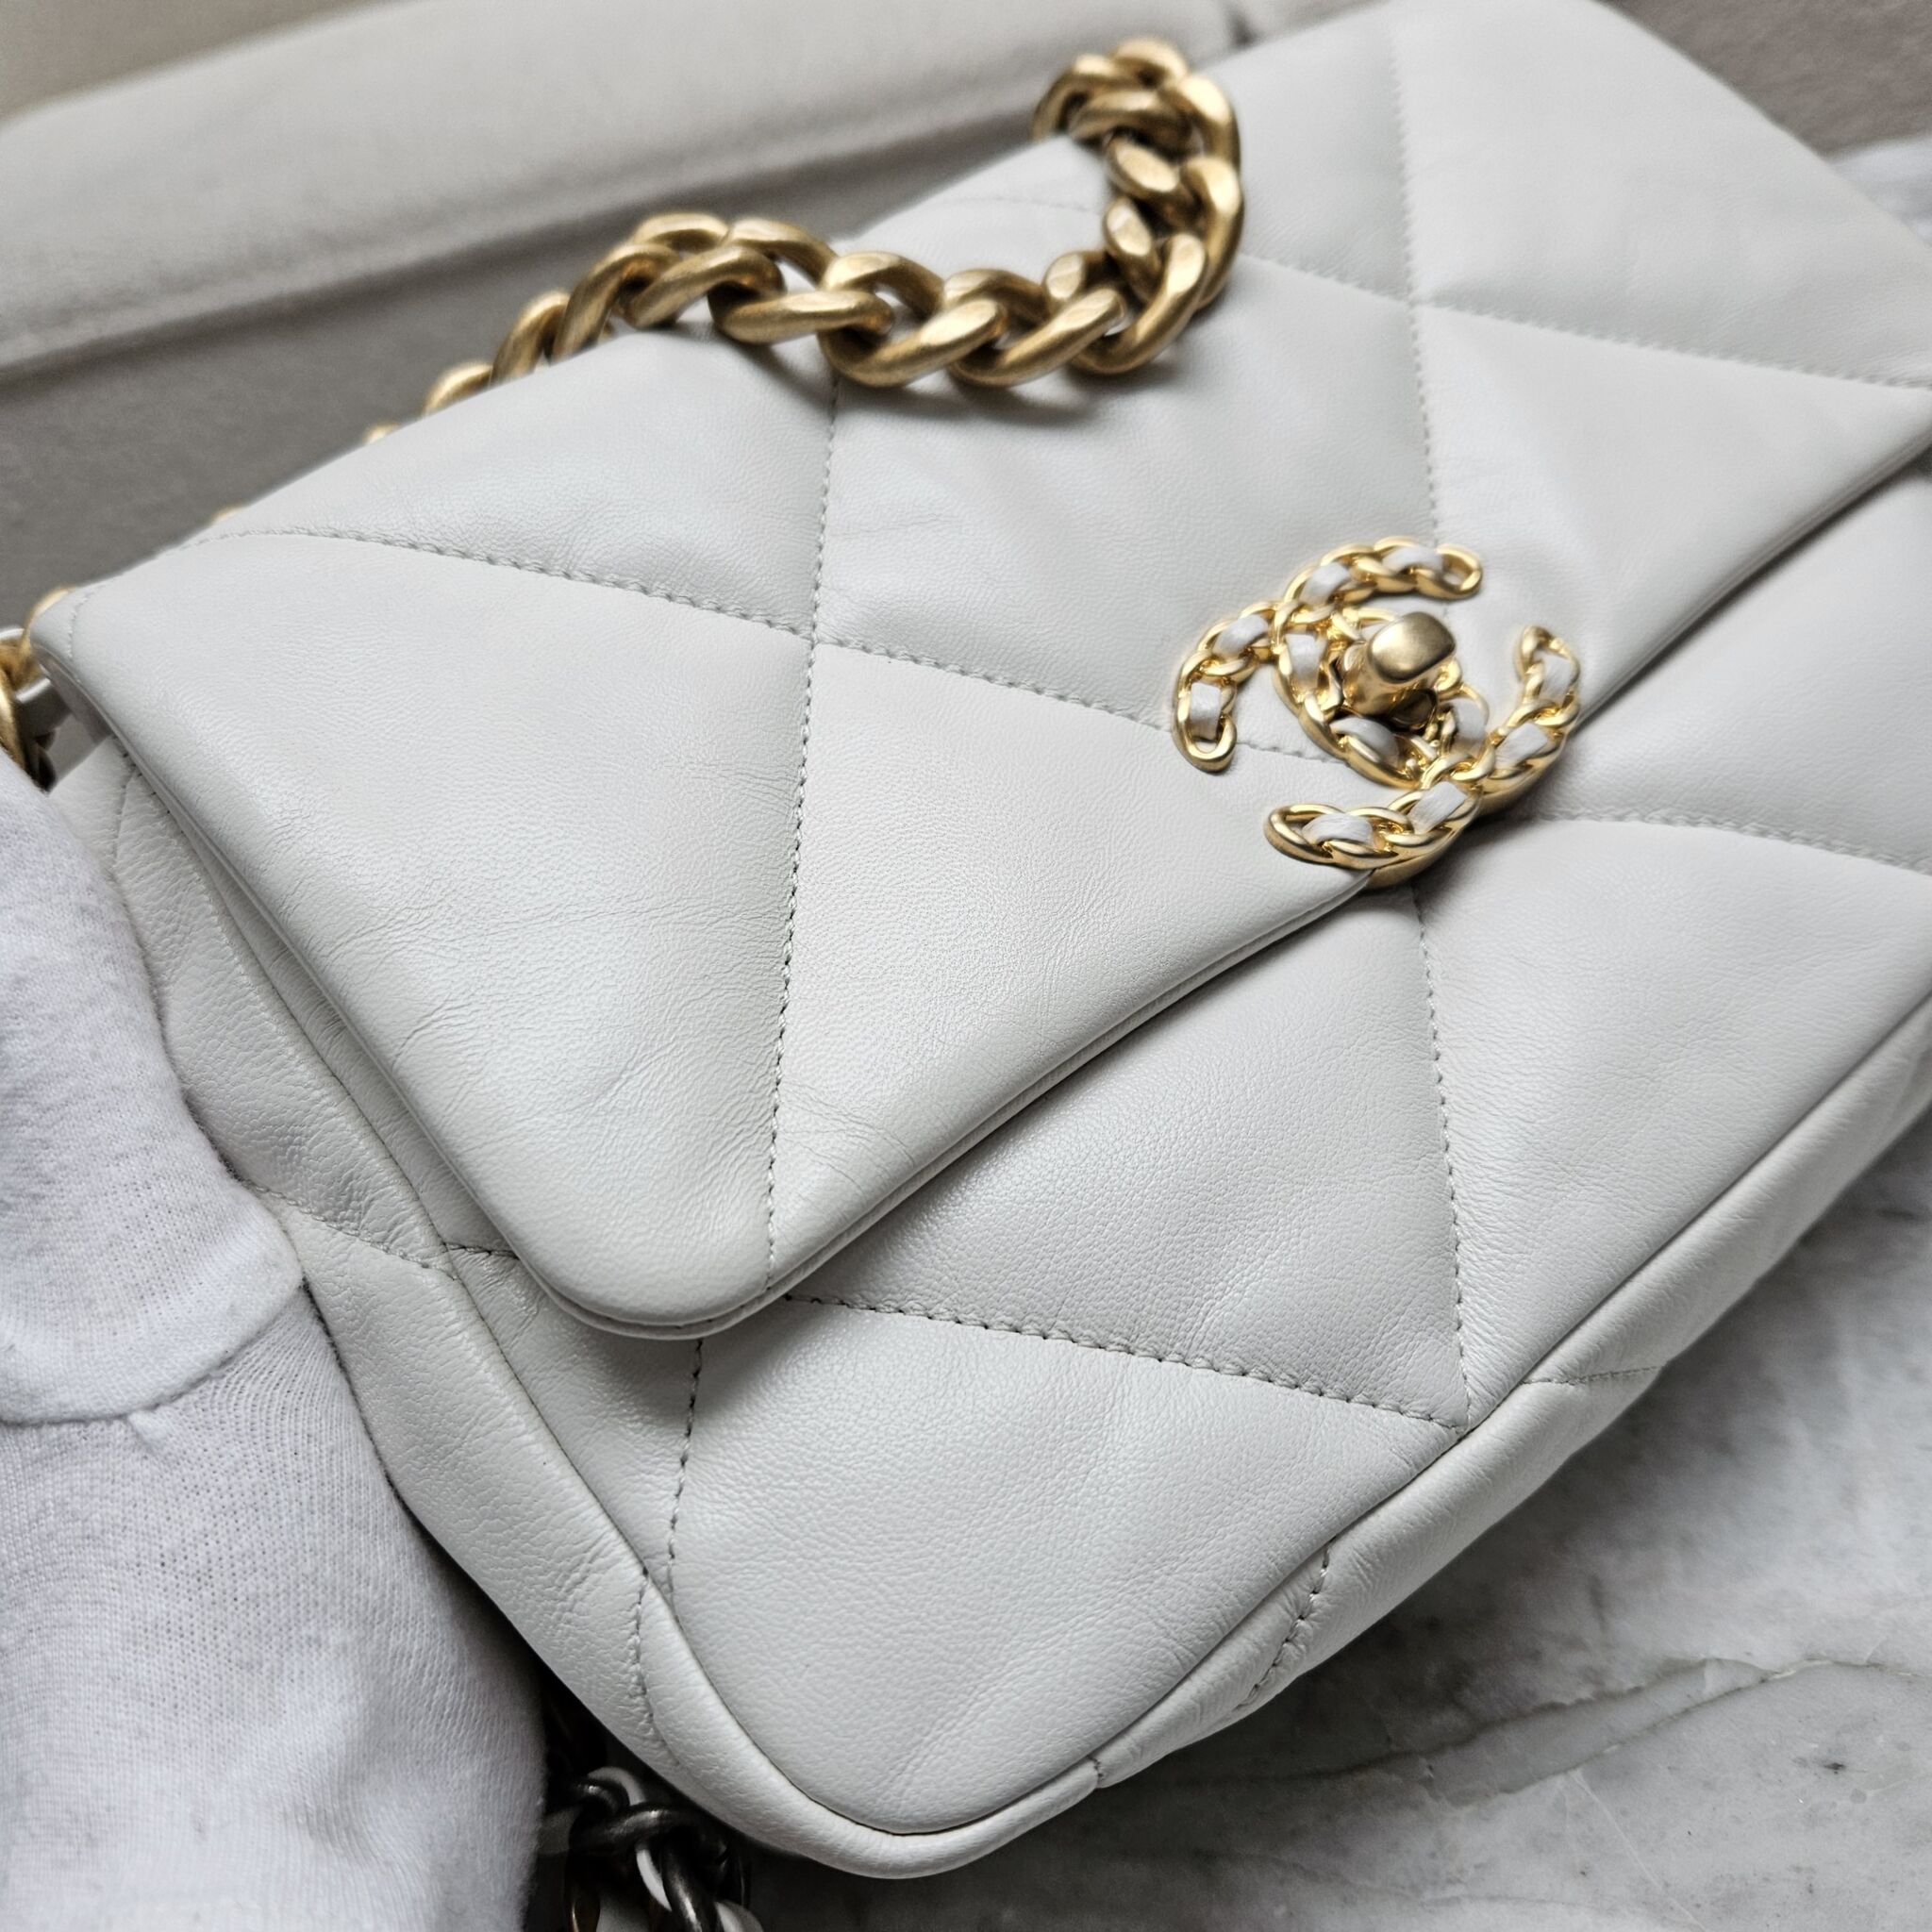 Bags Arkiv - Page 4 of 10 - Laulay Luxury